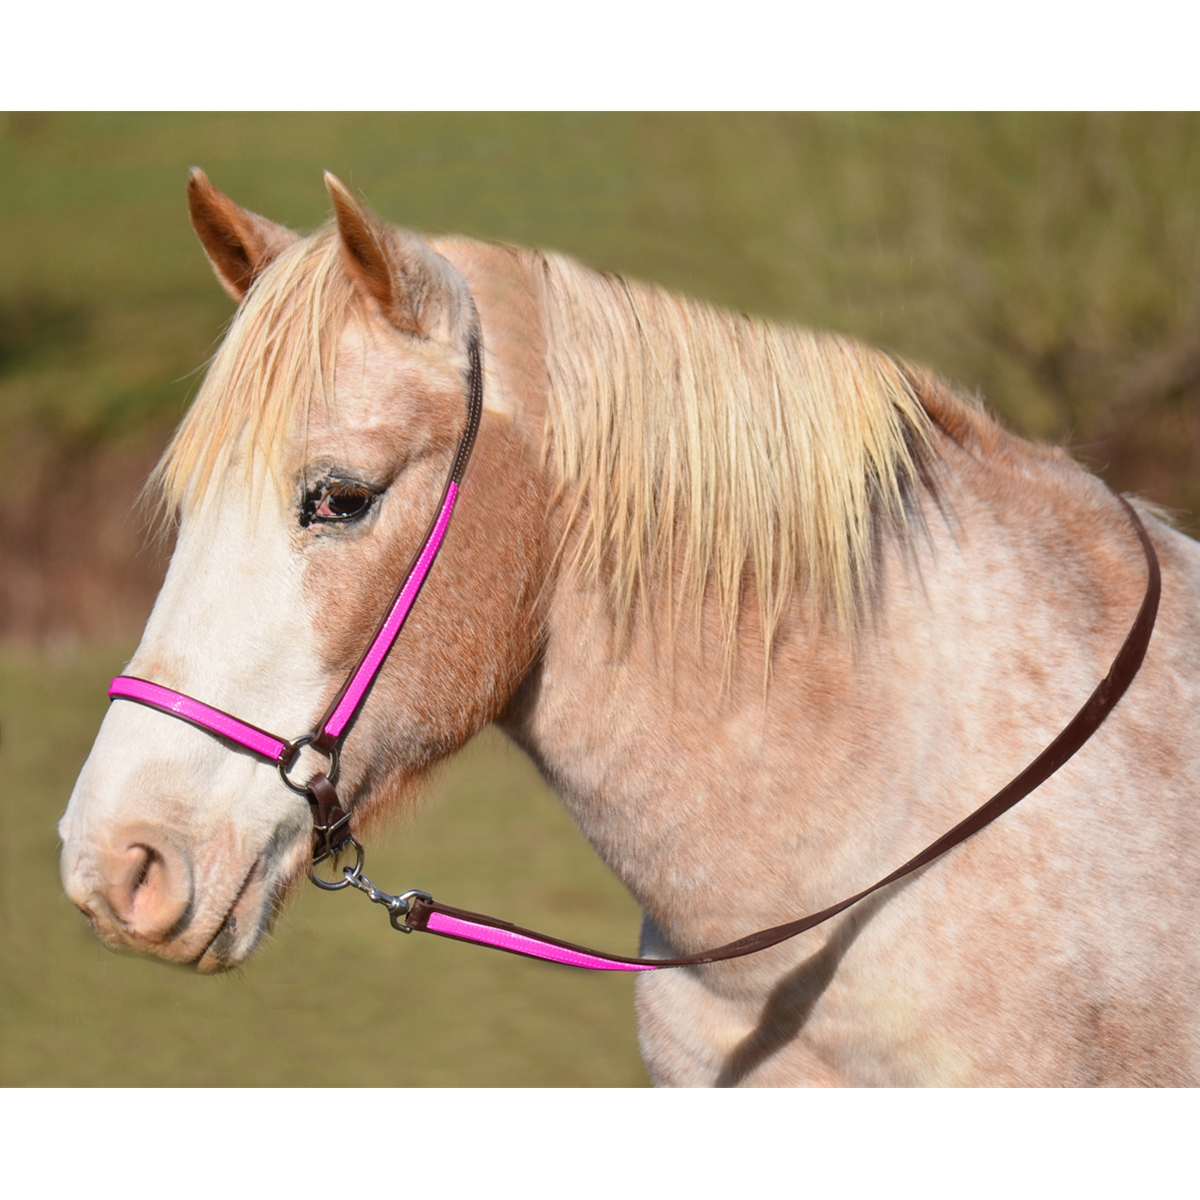 Grooming Halter & Lead in 2 Color Combo - Two Horse Tack